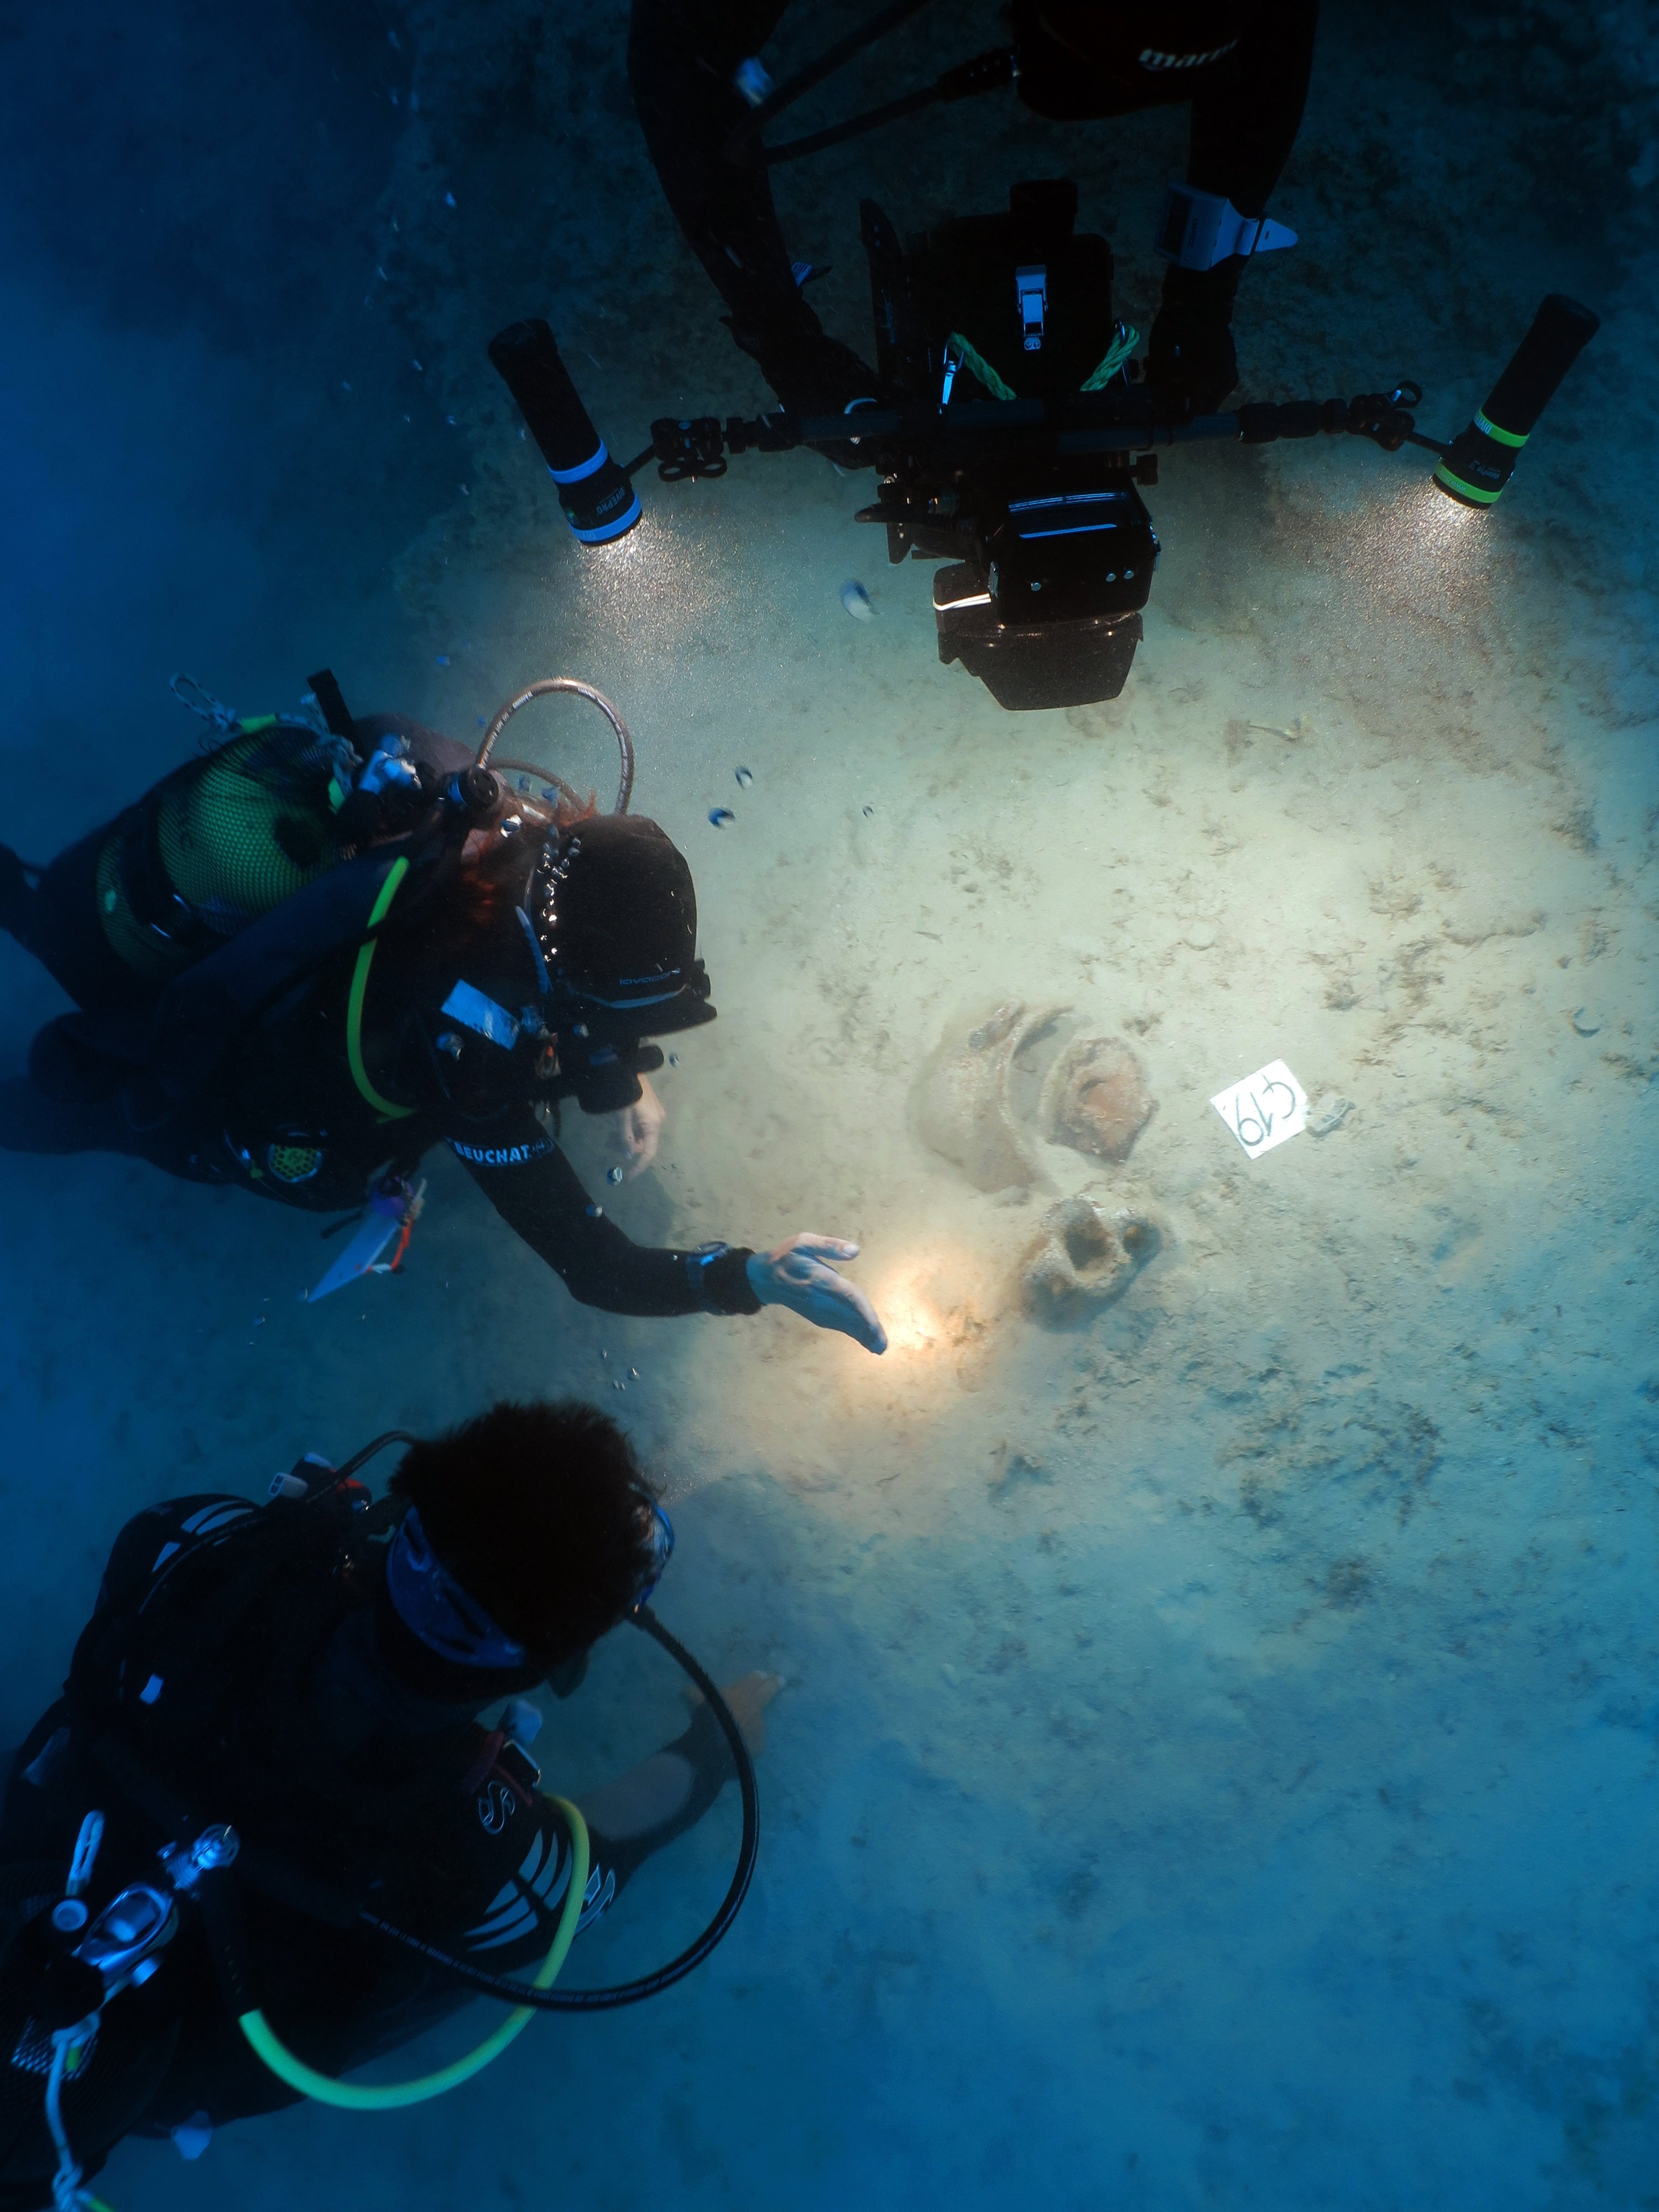 Turkish divers find pottery remains during their dive in Bozburun offshores, Muğla, southwestern Turkey, Oct. 26, 2020. (AA Photo)